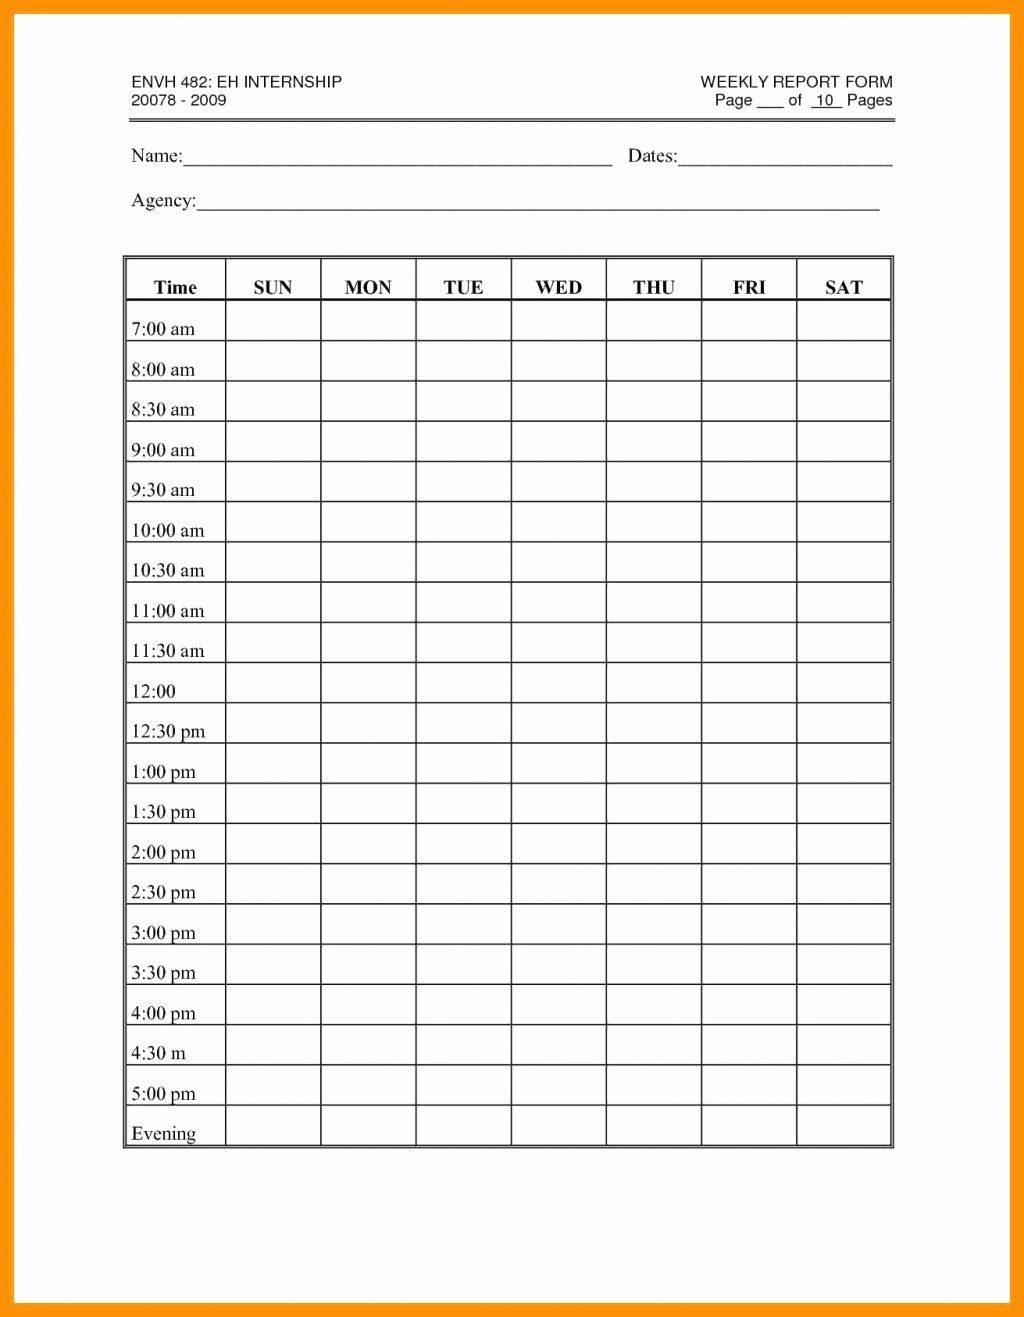 Free Group Weight Loss Spreadsheet Template With Weight Loss Spreadsheet Sheet Competition Beautiful Template Reddit